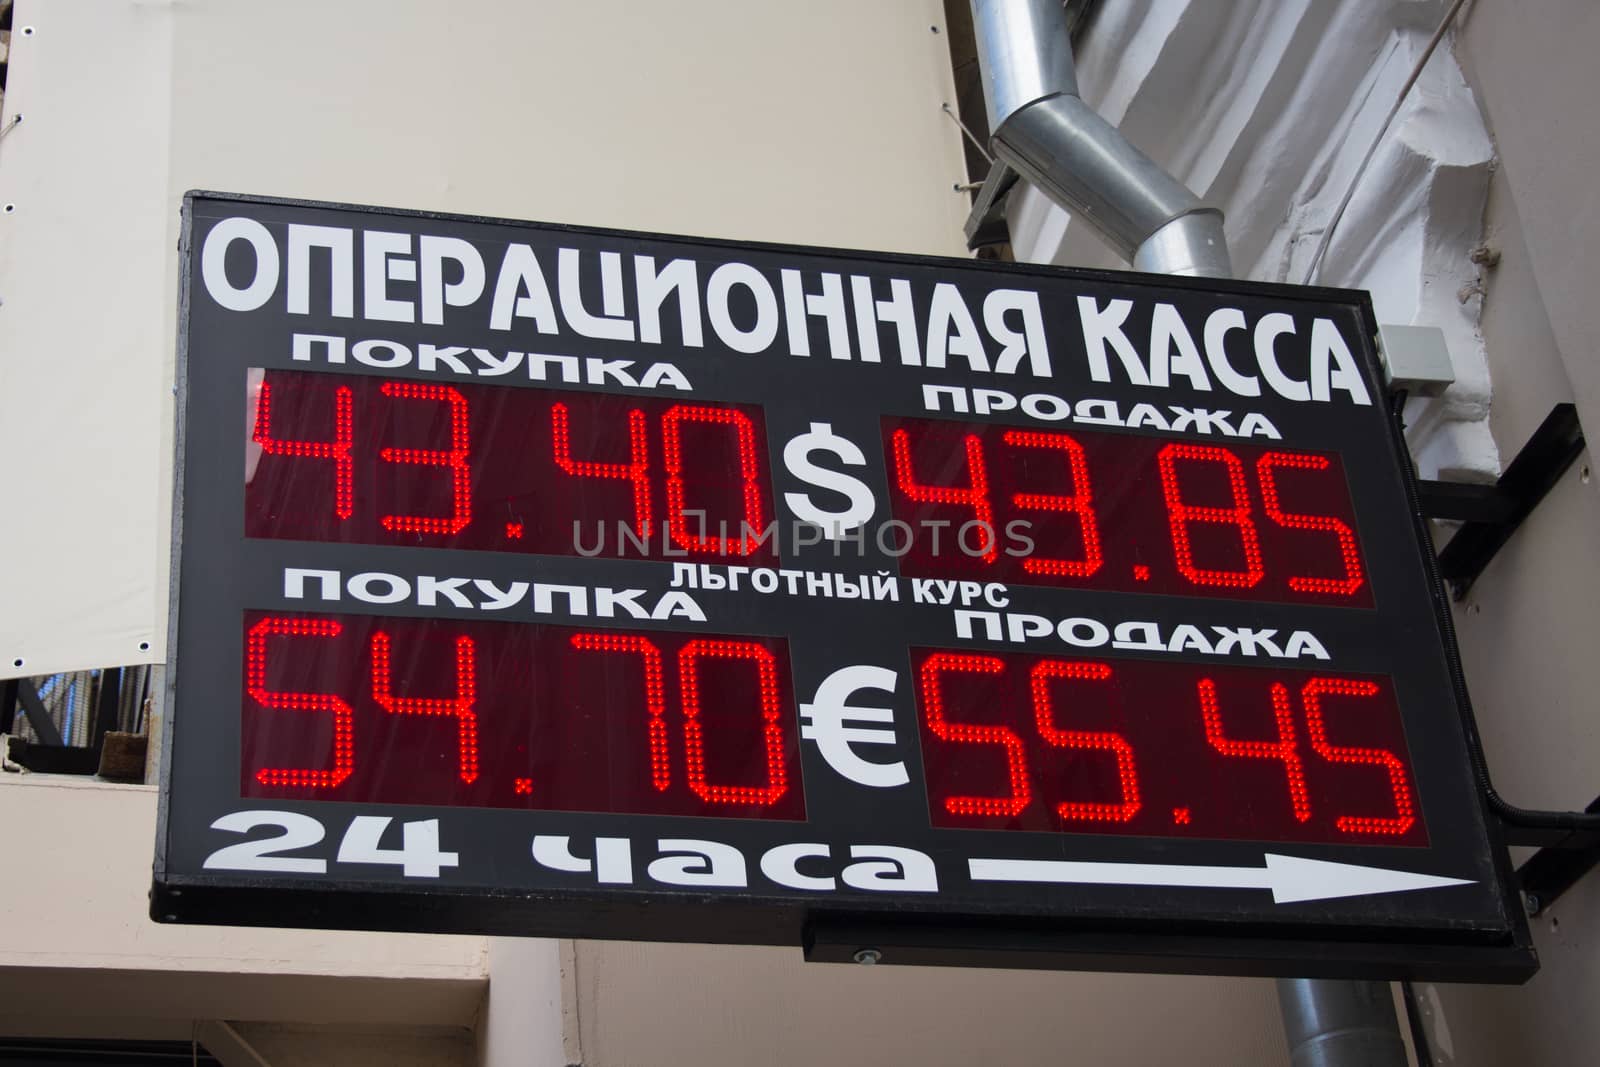 Moscow, Russia - October 30, 2014. The plate with the exchange rate of the ruble against the dollar and Euro in Russia